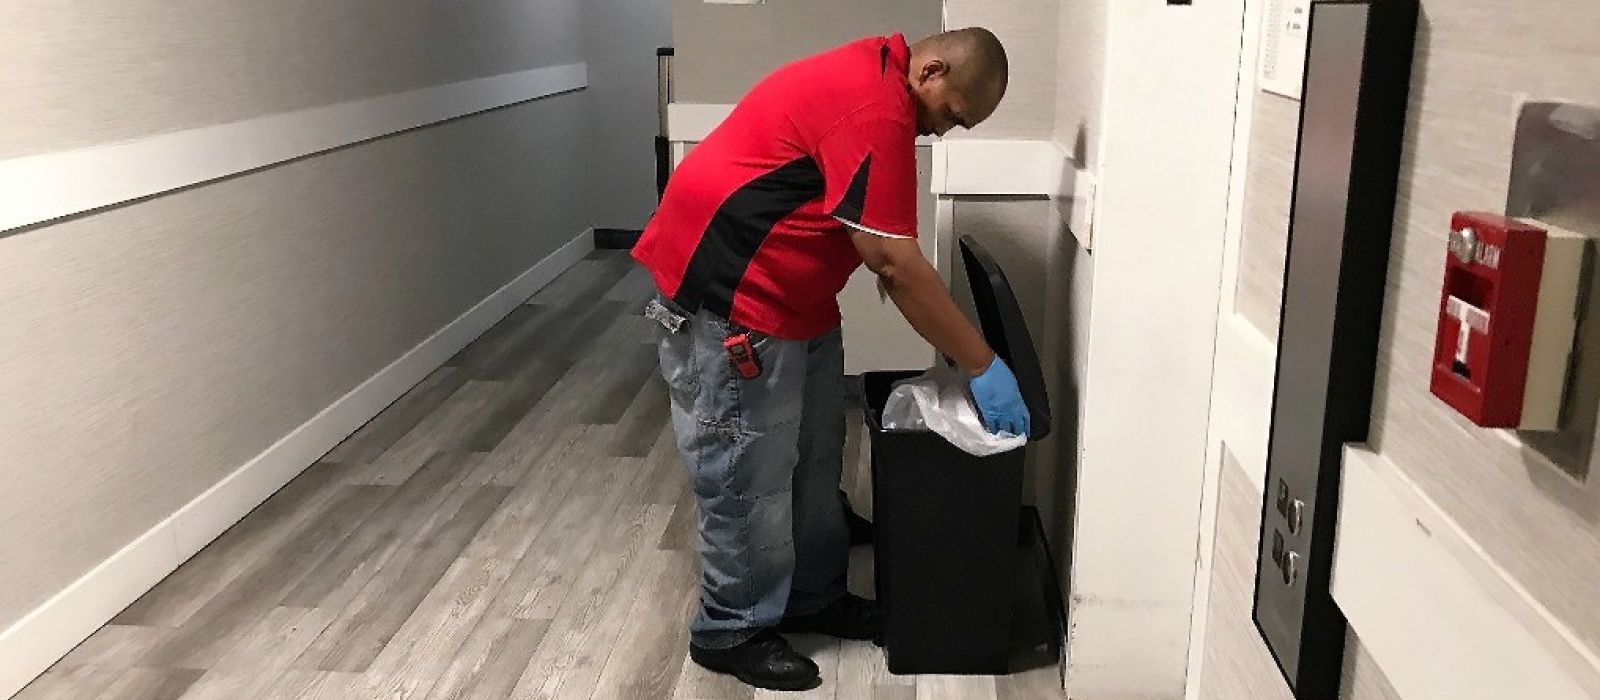 LCS participant wearing a red shirt and gray pants is changing a trash bag in a trash can